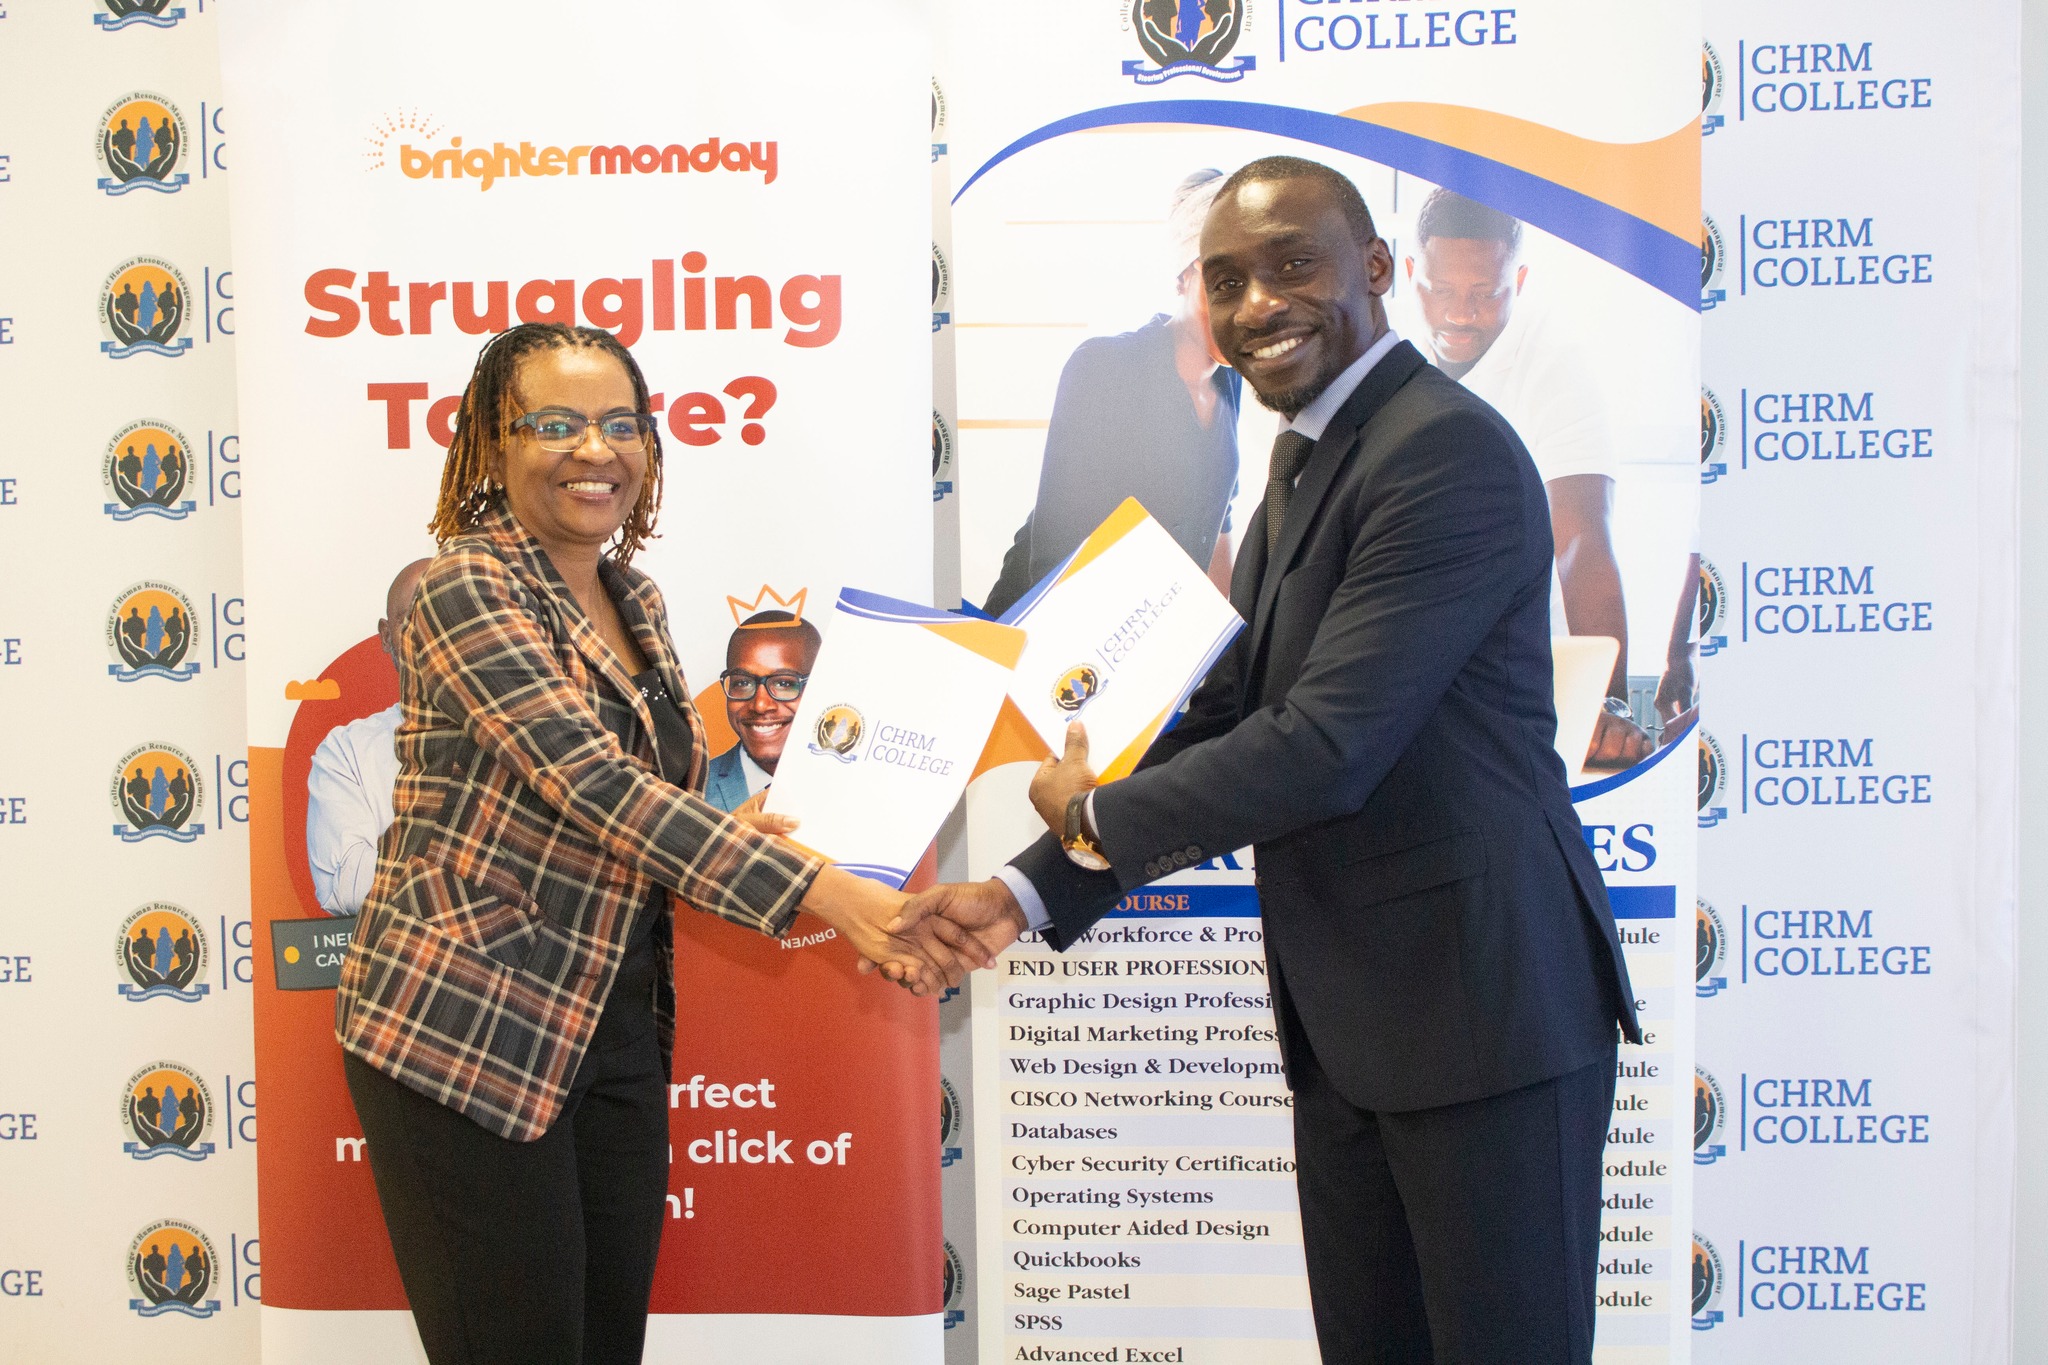 BrighterMonday and the College of Human Resource Management (CHRM) Join Forces to Enhance Opportunities for HR Professionals